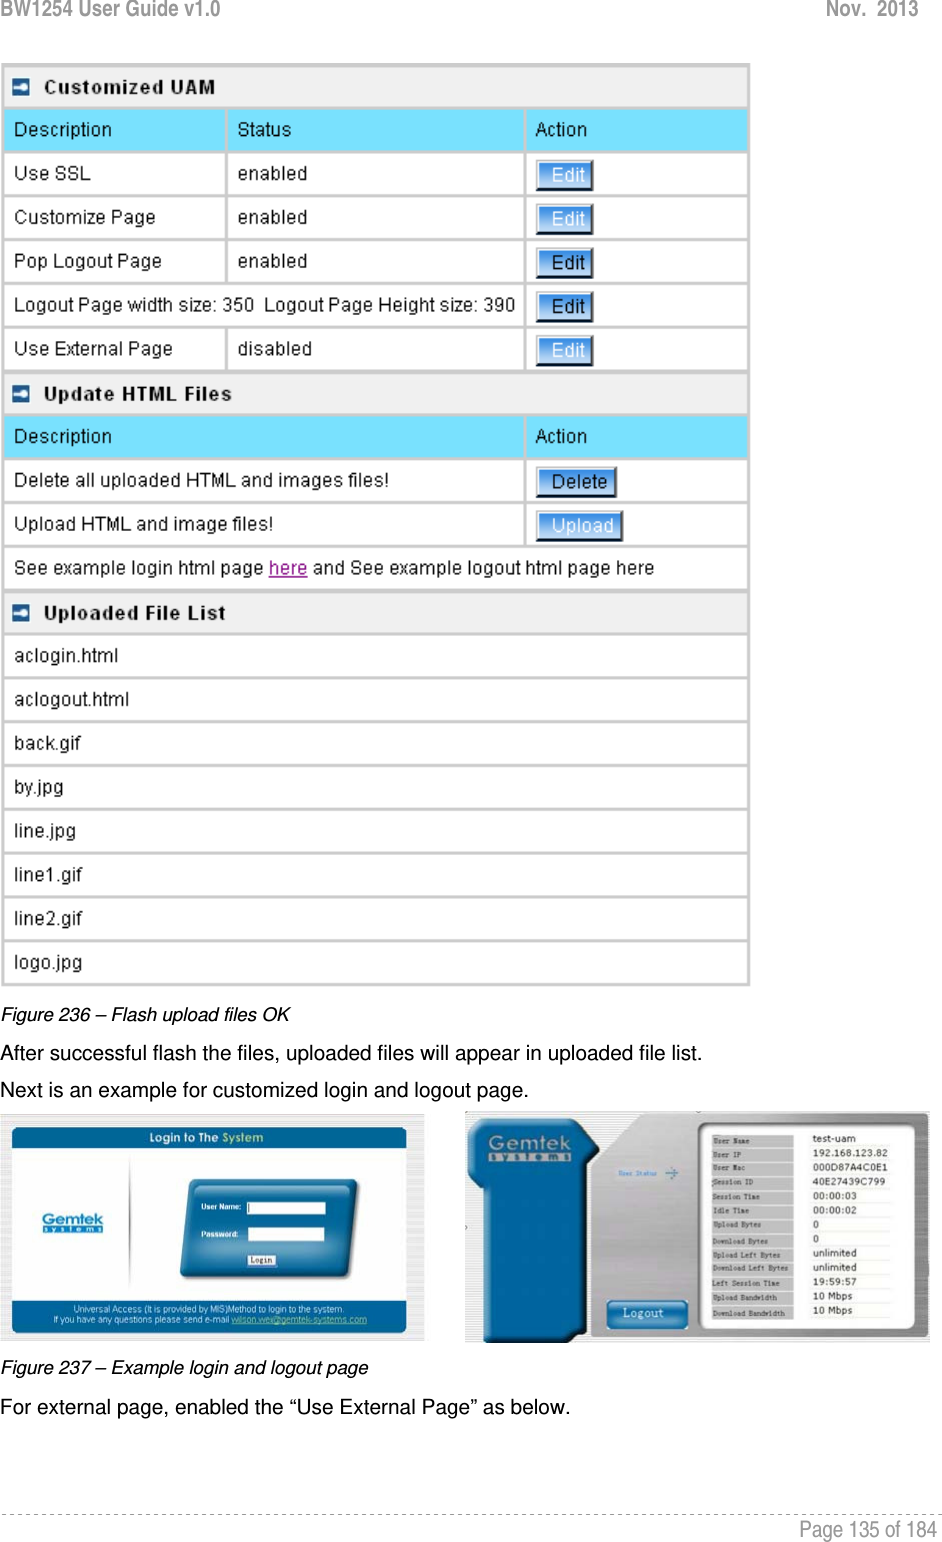 BW1254 User Guide v1.0  Nov.  2013     Page 135 of 184    Figure 236 – Flash upload files OK After successful flash the files, uploaded files will appear in uploaded file list. Next is an example for customized login and logout page.  Figure 237 – Example login and logout page For external page, enabled the “Use External Page” as below. 